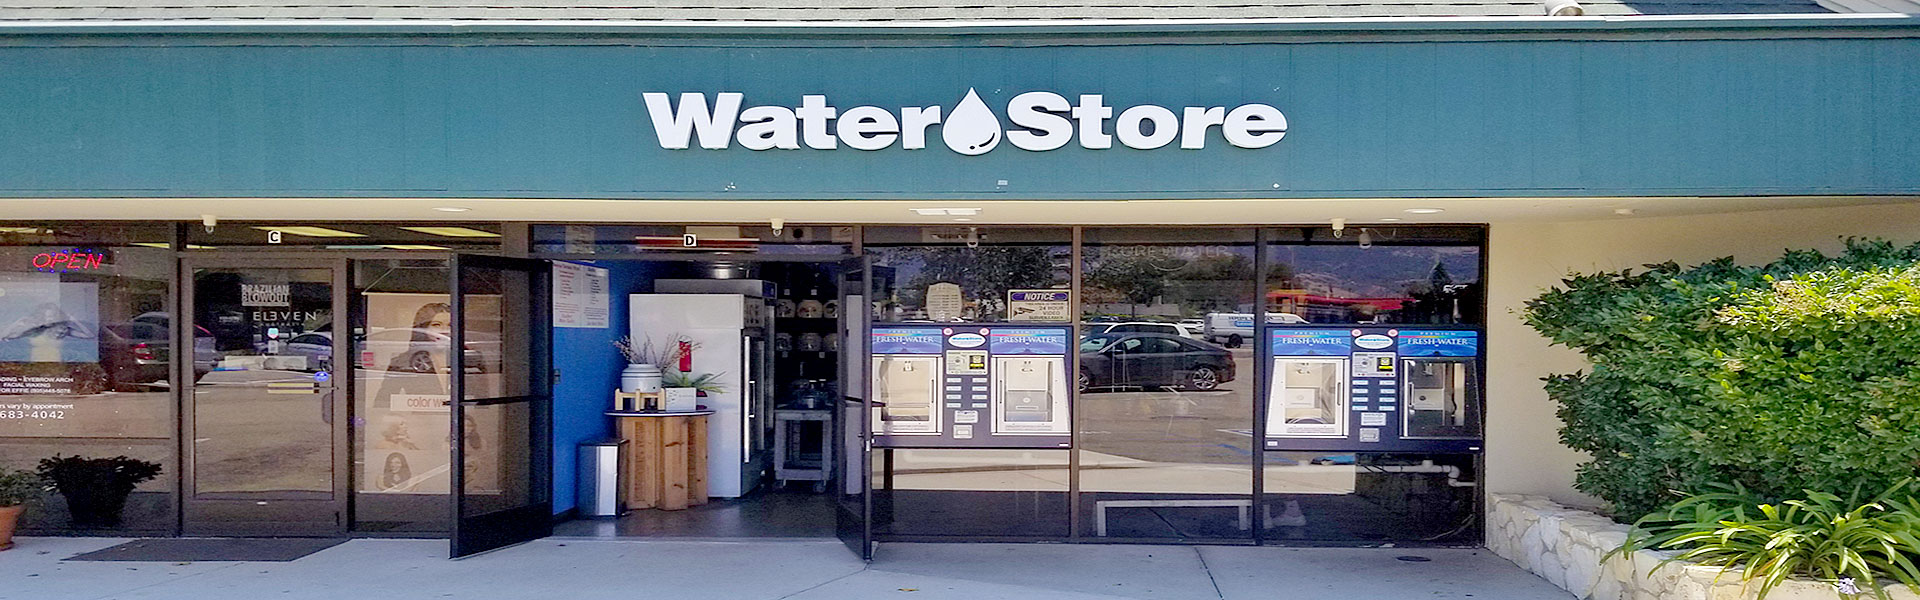 The storefront of the Water Store Goleta